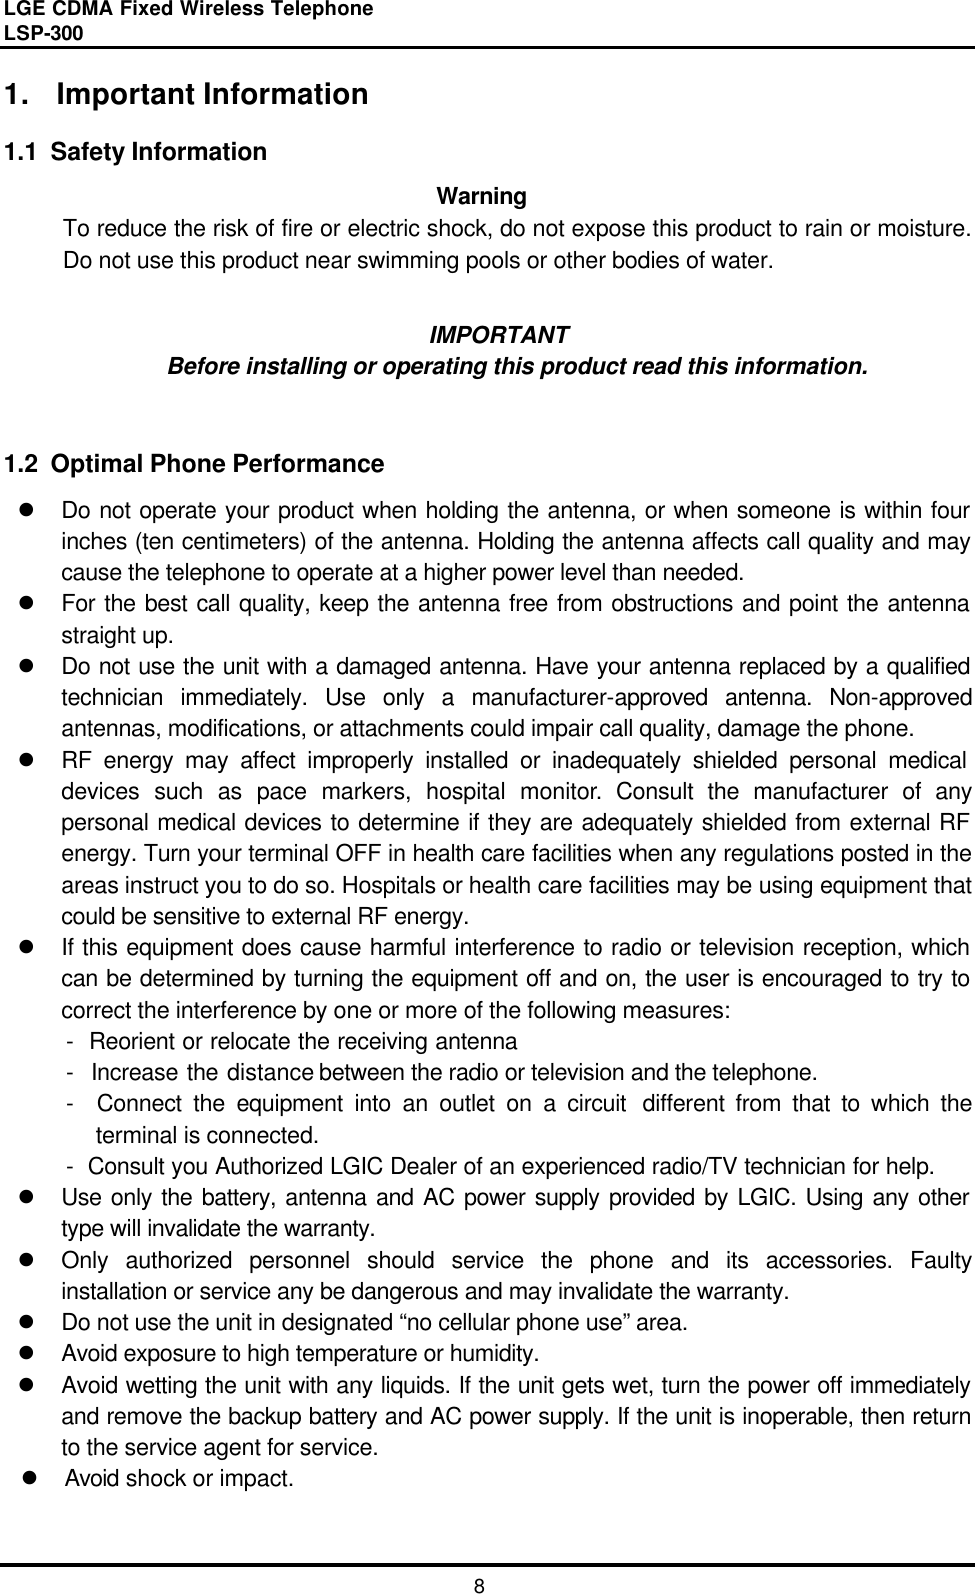 LGE CDMA Fixed Wireless Telephone                                       LSP-300     8 1. Important Information  1.1  Safety Information   Warning To reduce the risk of fire or electric shock, do not expose this product to rain or moisture. Do not use this product near swimming pools or other bodies of water.  IMPORTANT Before installing or operating this product read this information.   1.2  Optimal Phone Performance l Do not operate your product when holding the antenna, or when someone is within four inches (ten centimeters) of the antenna. Holding the antenna affects call quality and may cause the telephone to operate at a higher power level than needed.   l For the best call quality, keep the antenna free from obstructions and point the antenna straight up. l Do not use the unit with a damaged antenna. Have your antenna replaced by a qualified technician immediately. Use only a manufacturer-approved antenna. Non-approved antennas, modifications, or attachments could impair call quality, damage the phone. l RF energy may affect improperly installed or inadequately shielded personal medical devices such as pace markers, hospital monitor. Consult the manufacturer of any personal medical devices to determine if they are adequately shielded from external RF energy. Turn your terminal OFF in health care facilities when any regulations posted in the areas instruct you to do so. Hospitals or health care facilities may be using equipment that could be sensitive to external RF energy. l If this equipment does cause harmful interference to radio or television reception, which can be determined by turning the equipment off and on, the user is encouraged to try to correct the interference by one or more of the following measures: -  Reorient or relocate the receiving antenna -  Increase the distance between the radio or television and the telephone. -  Connect the equipment into an outlet on a circuit different from that to which the                     terminal is connected. -  Consult you Authorized LGIC Dealer of an experienced radio/TV technician for help. l Use only the battery, antenna and AC power supply provided by LGIC. Using any other type will invalidate the warranty. l Only authorized personnel should service the phone and its accessories. Faulty installation or service any be dangerous and may invalidate the warranty. l Do not use the unit in designated “no cellular phone use” area. l Avoid exposure to high temperature or humidity. l Avoid wetting the unit with any liquids. If the unit gets wet, turn the power off immediately and remove the backup battery and AC power supply. If the unit is inoperable, then return to the service agent for service. l Avoid shock or impact.  